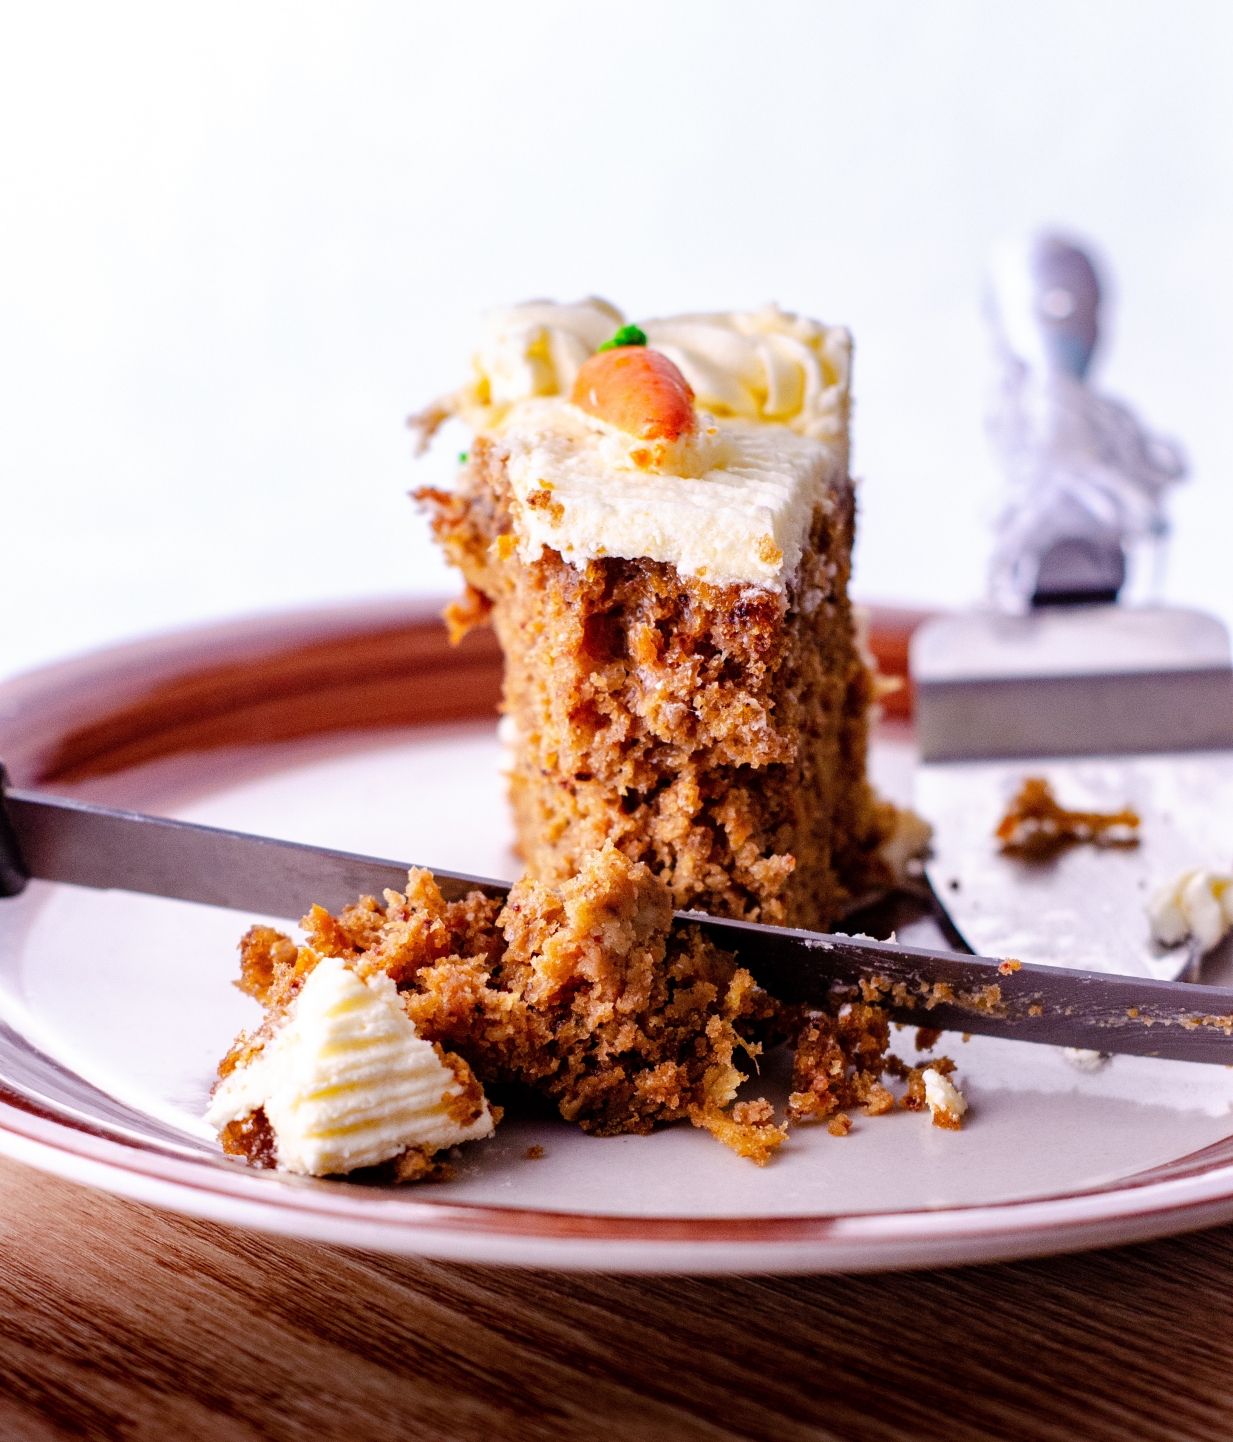 A photograph of a slice of frosted carrot cake on a plate.